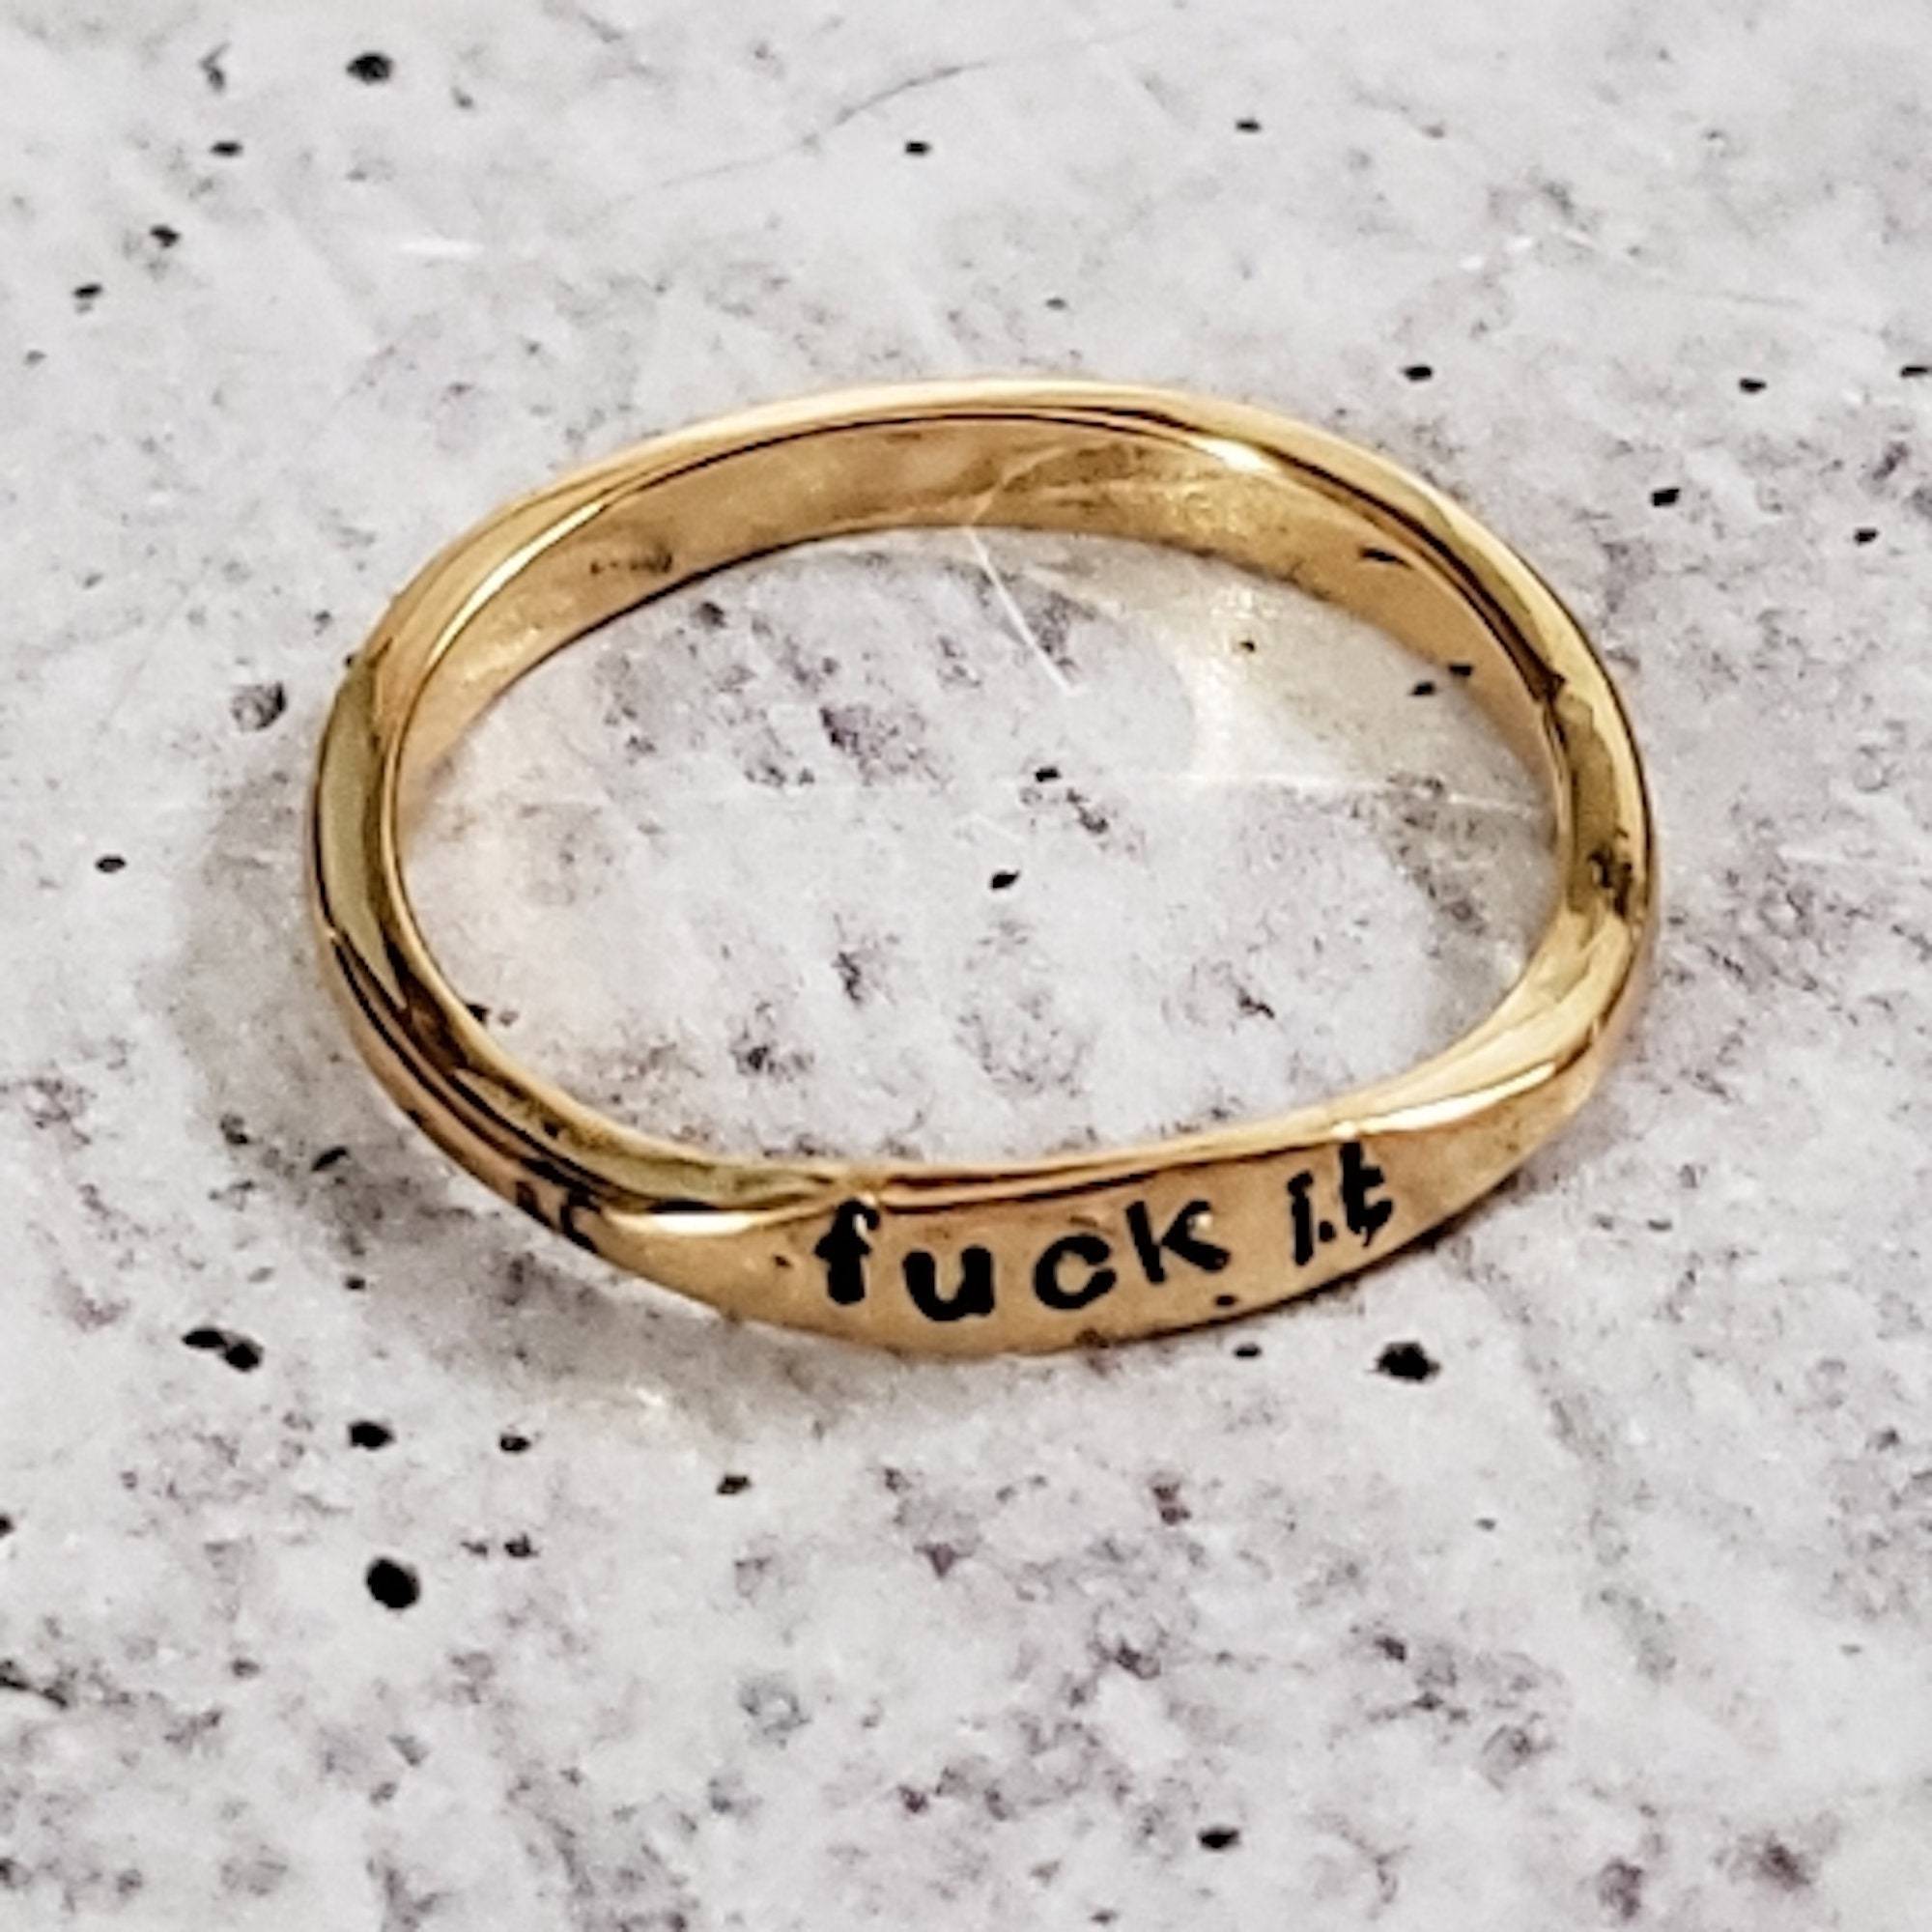 FUCK IT Dainty Gold Ring Salt and Sparkle